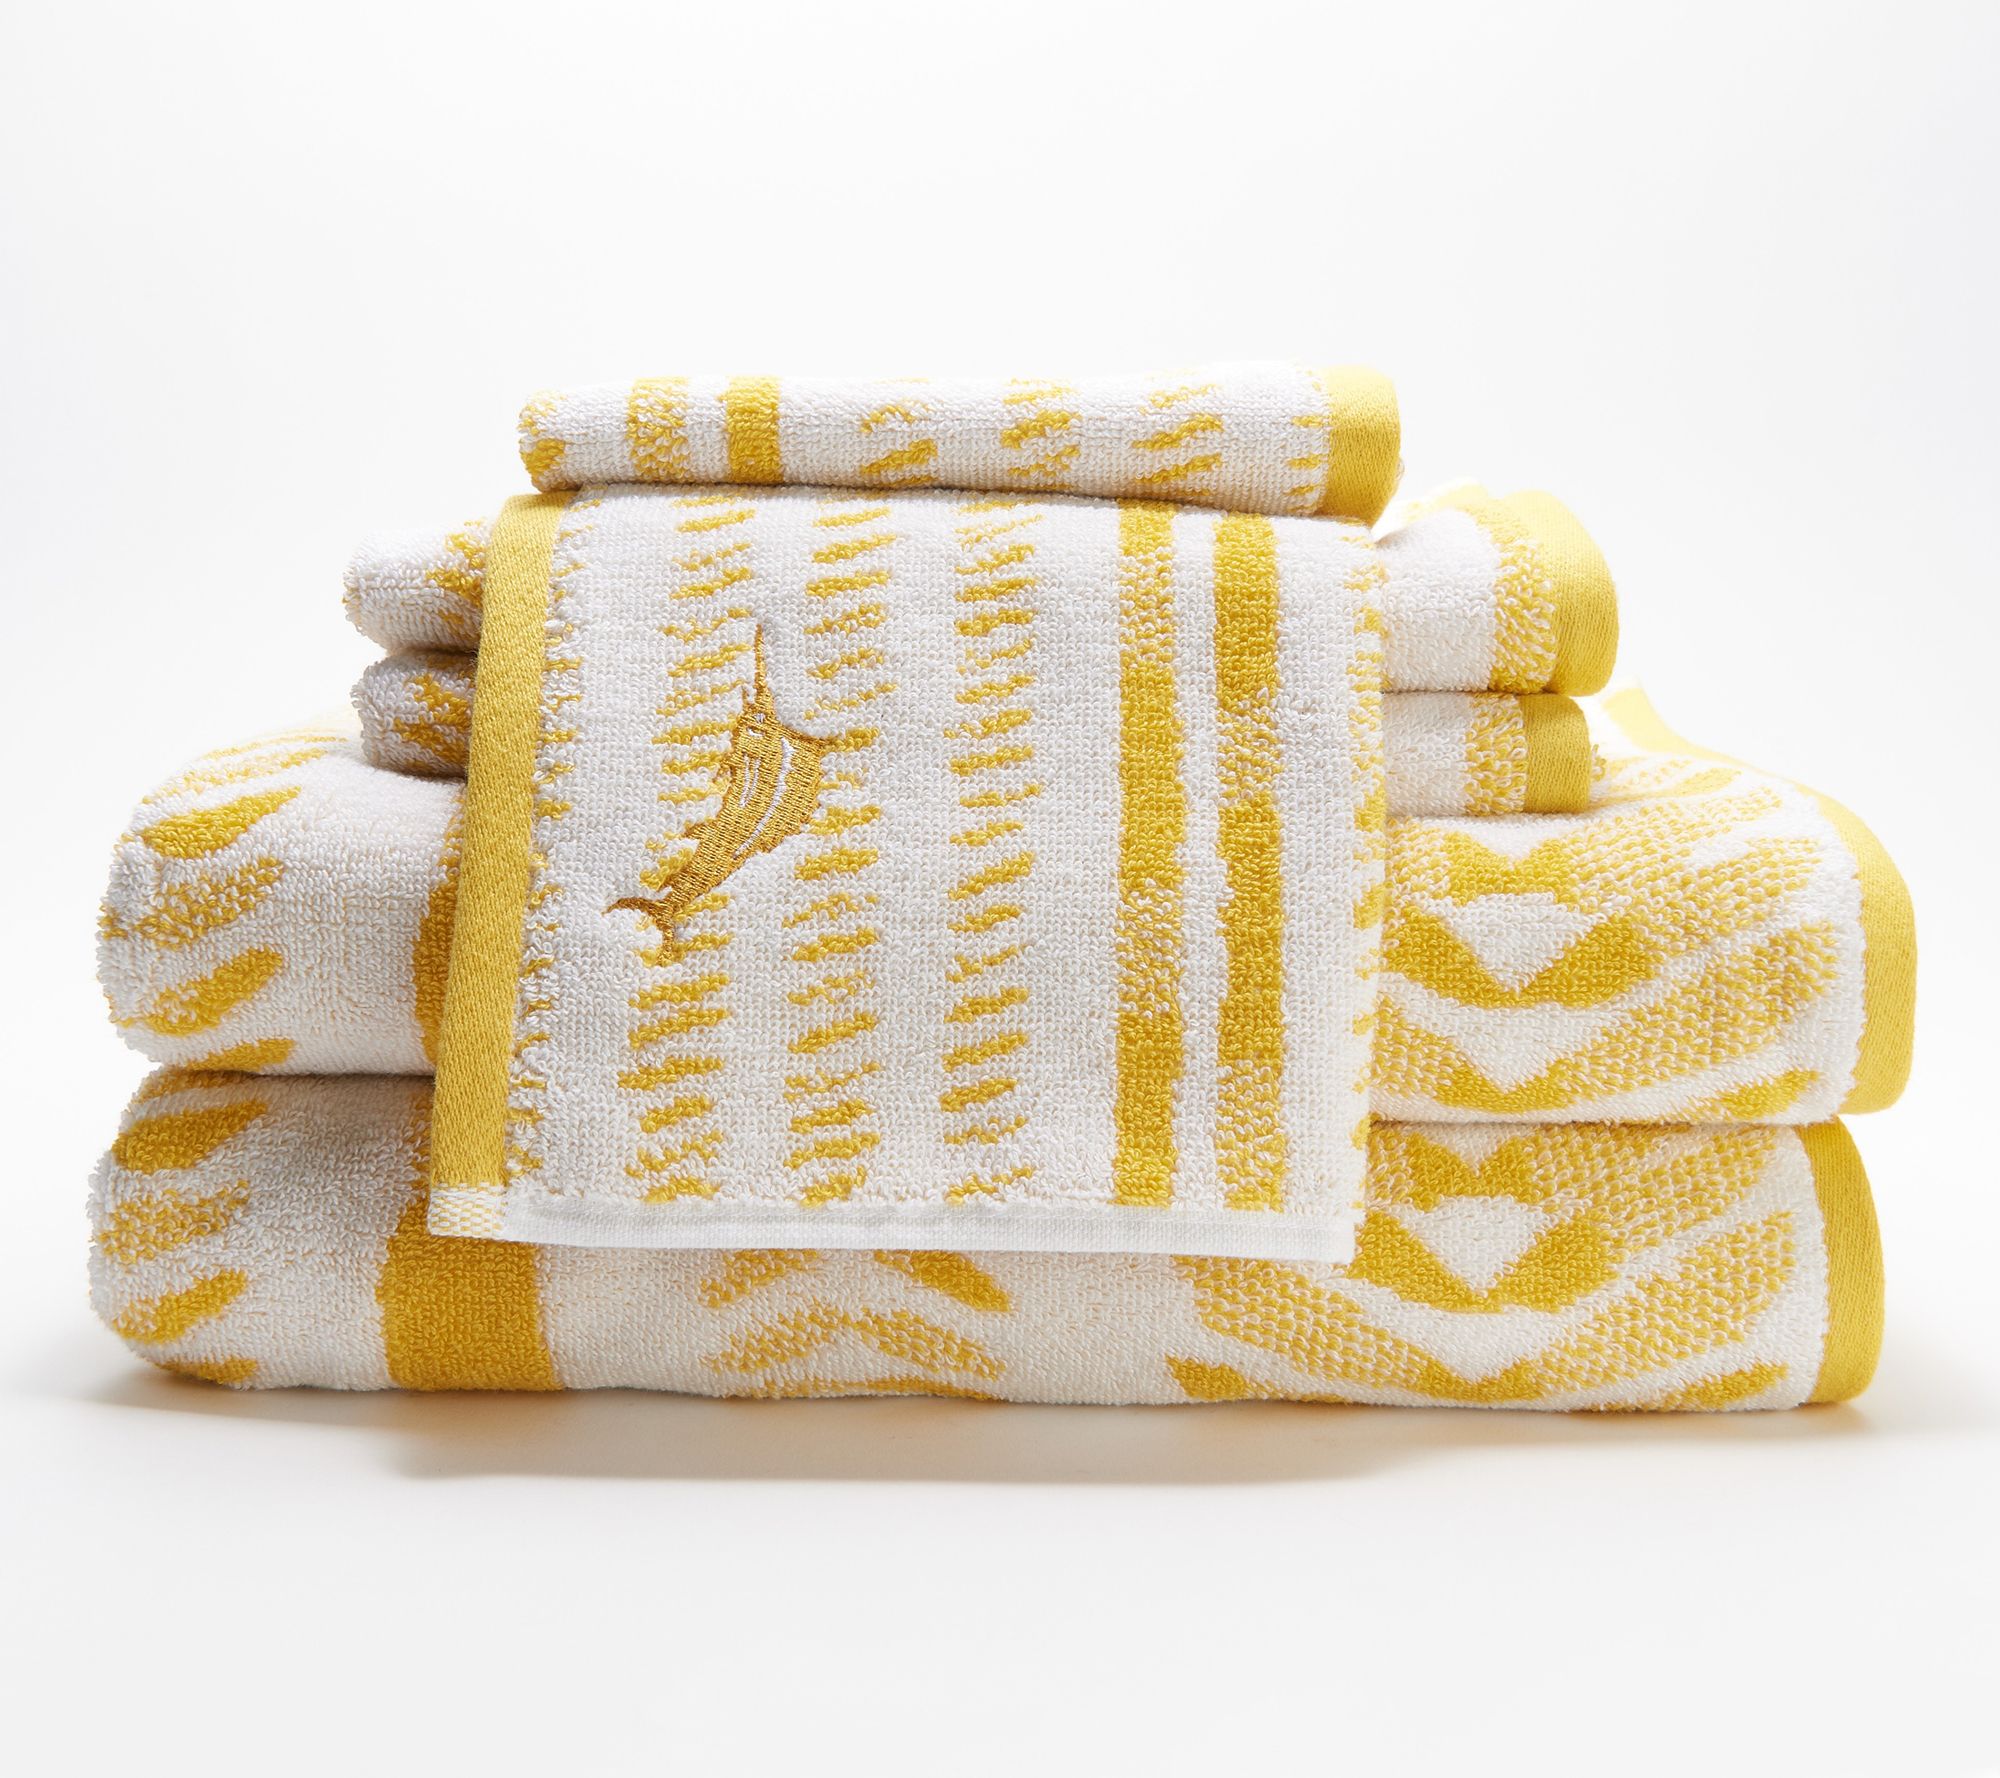 Towel and Linen Mart 100% Cotton Kitchen Towels,15 x 25 Inches Yellow,Soft, Absorbent,Tea Towels, Hand Towels,Bar Towels, Dish Towels (Pack of 6)